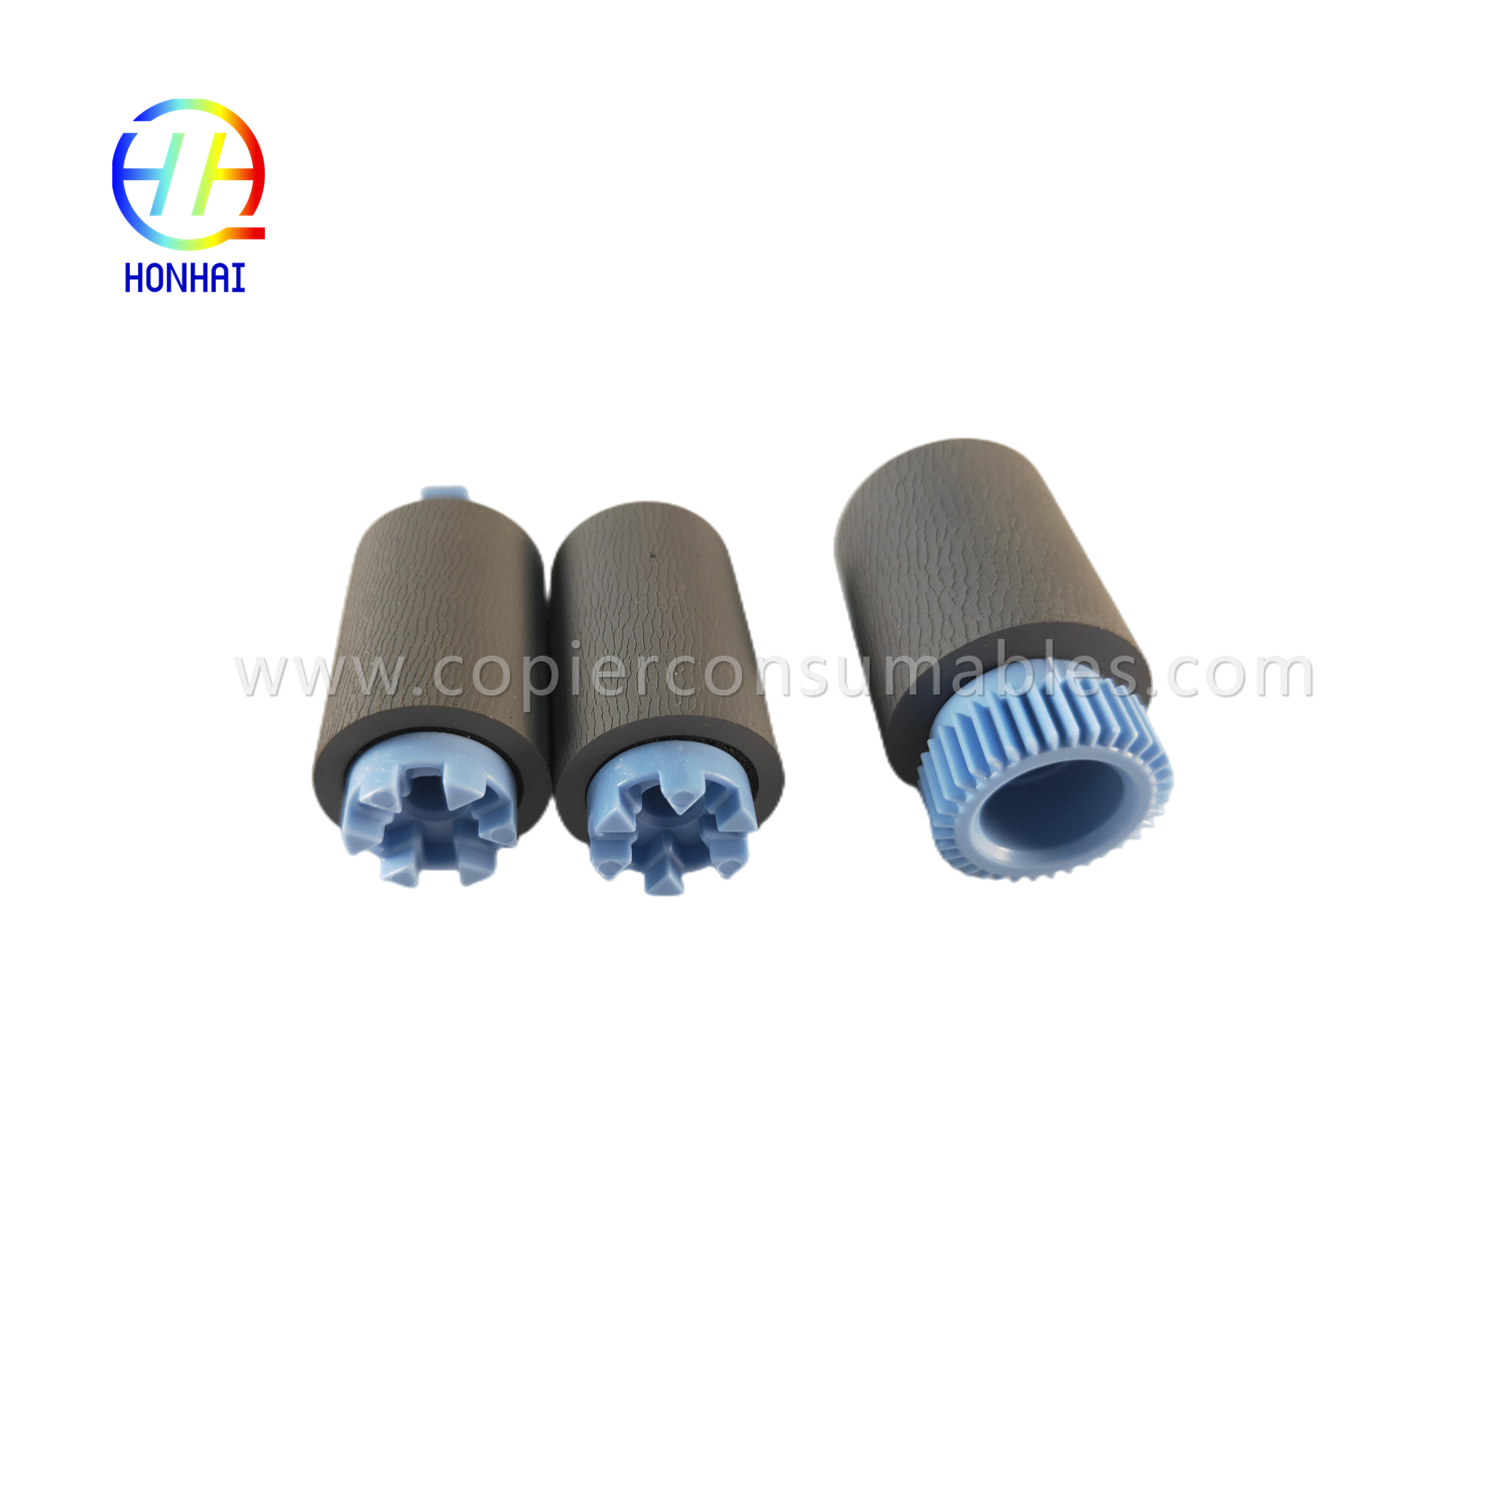 https://www.copierconsumables.com/tray-2-5-pickup-feed-separation-roller-set-for-hp-a7w93-67082-mfp-785f-780dn-e77650z-e77660z-e77650dn-e77660dn-p77740dn-p77750z-p77760z-p75050dn-p75050dw-product/